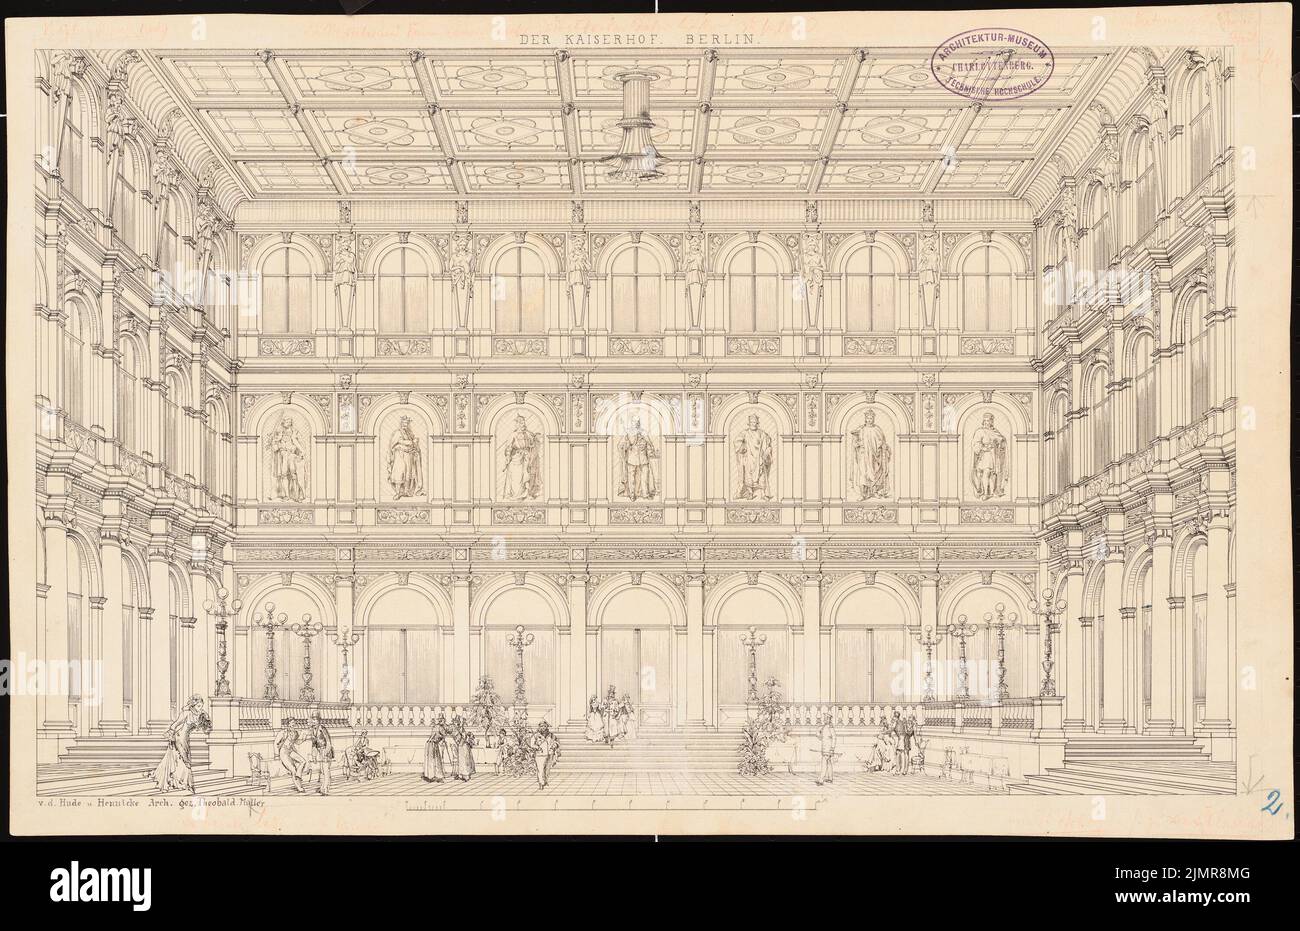 Hude & Hennicke, Hotel Kaiserhof Berlin (without dat.): Perspective view of the reception hall. Ink on cardboard, 30.9 x 47.7 cm (including scan edges) Hude & Hennicke : Hotel Kaiserhof Berlin Stock Photo